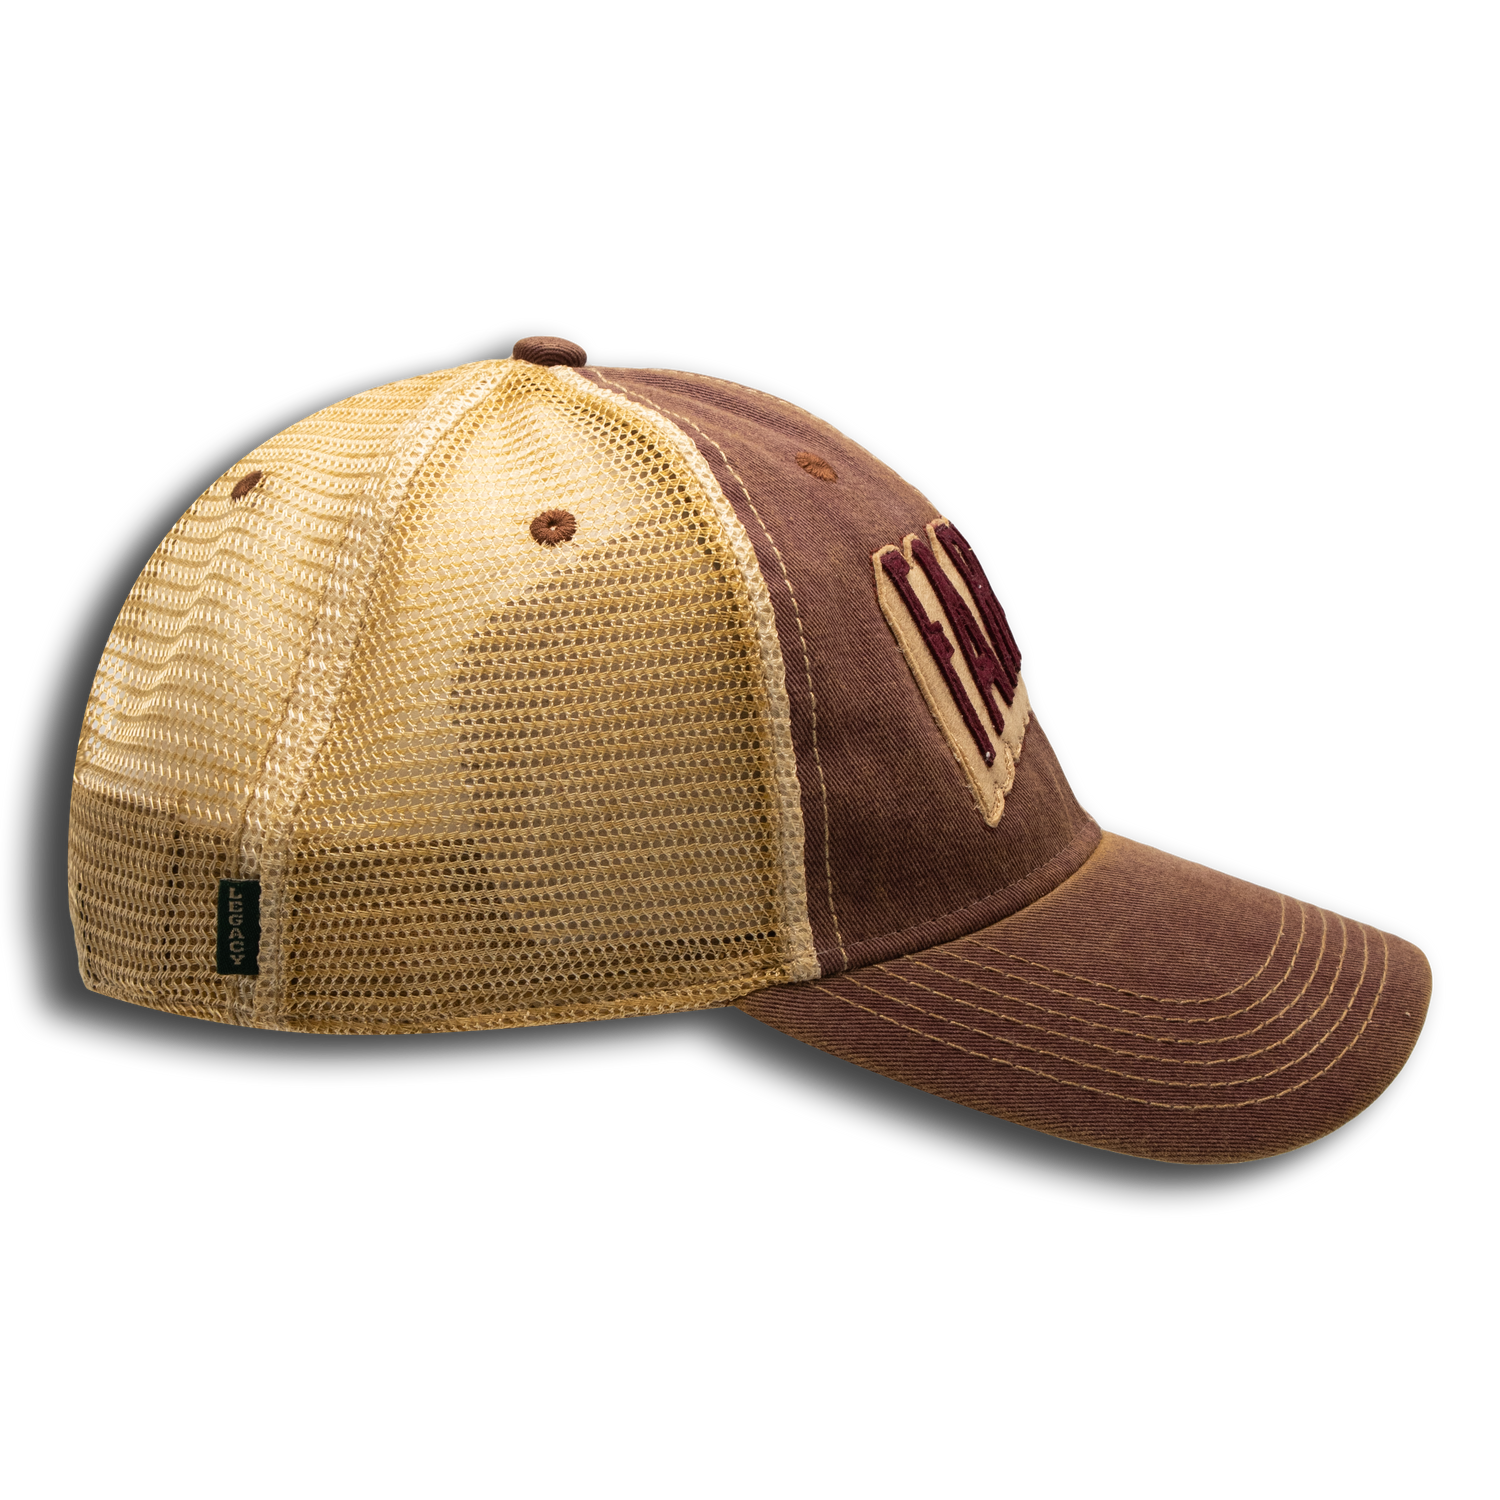 Texas A&M Old Favorite Farmers Fight Hat